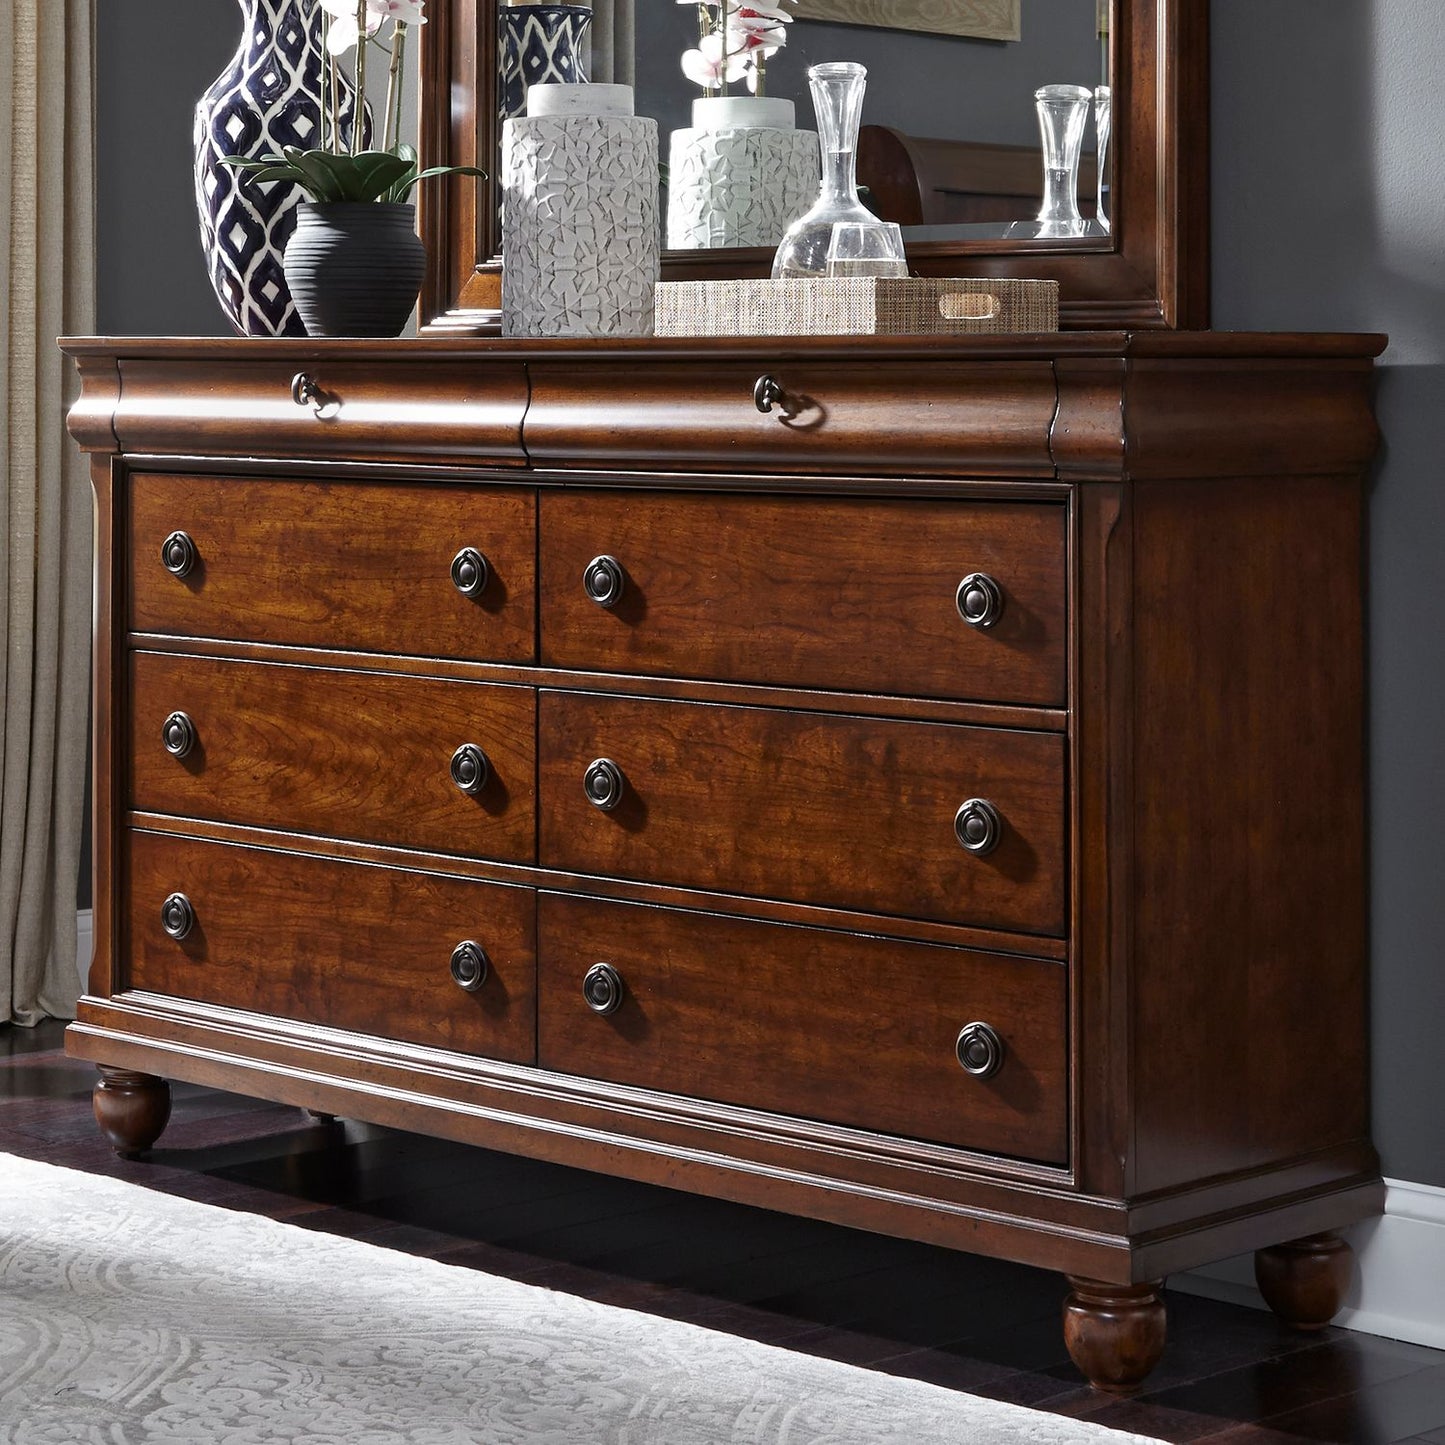 Rustic Traditions - 8 Drawer Dresser